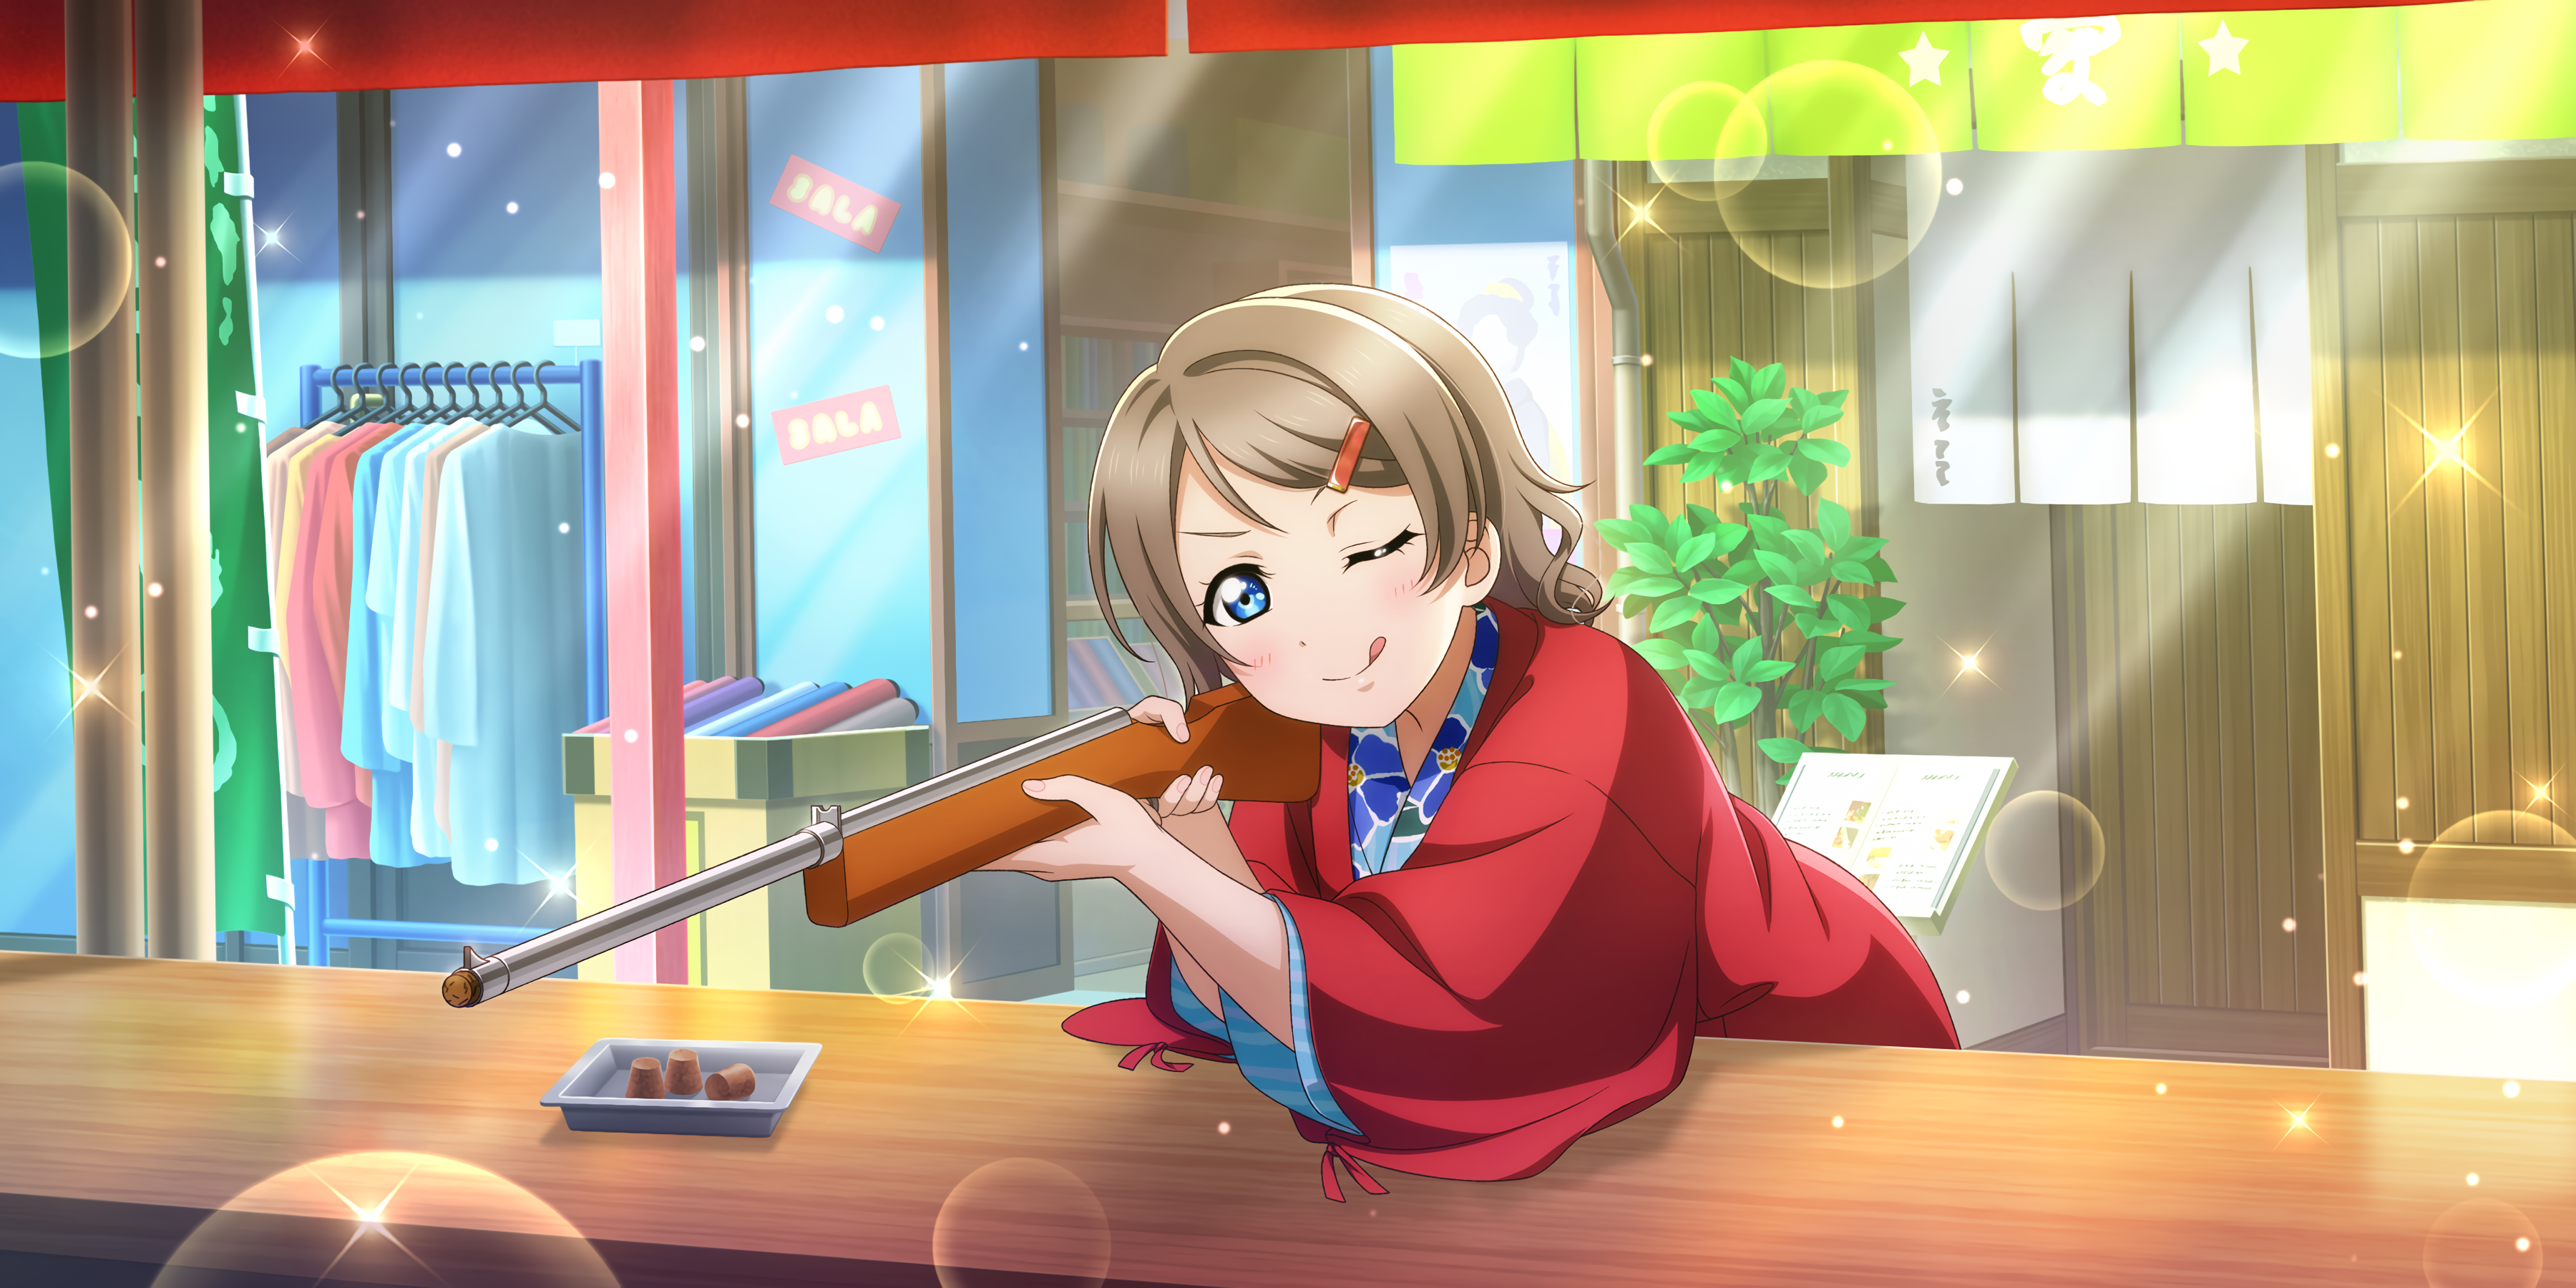 Anime 3600x1800 Watanabe You Love Live! Sunshine Love Live! anime anime girls gun girls with guns tongue out one eye closed bubbles stars clothes leaves kimono